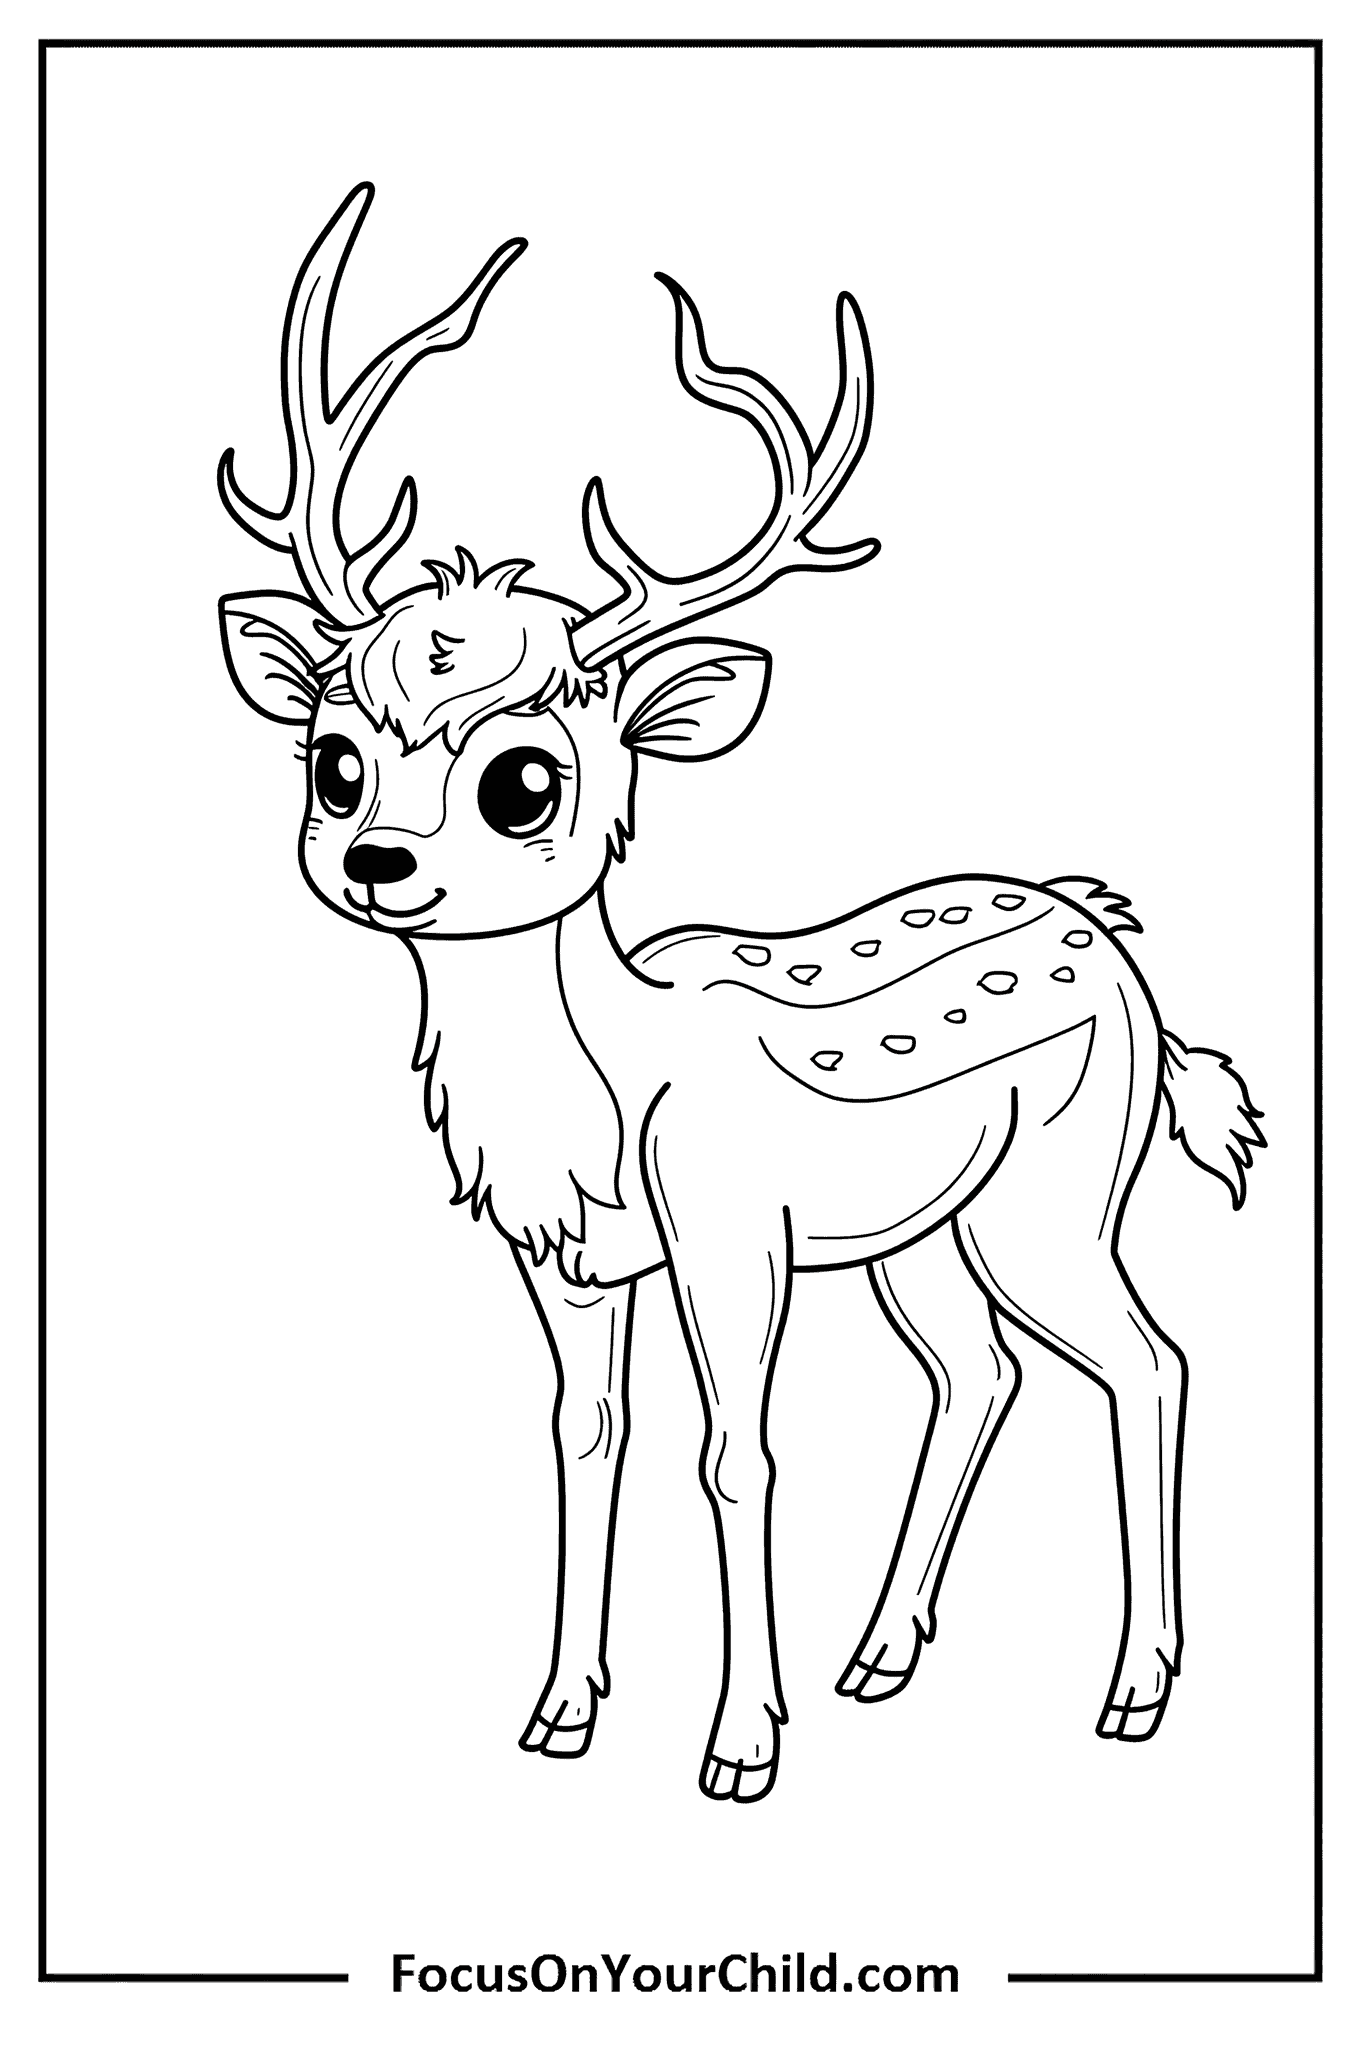 Youthful deer coloring page for kids from FocusOnYourChild.com.